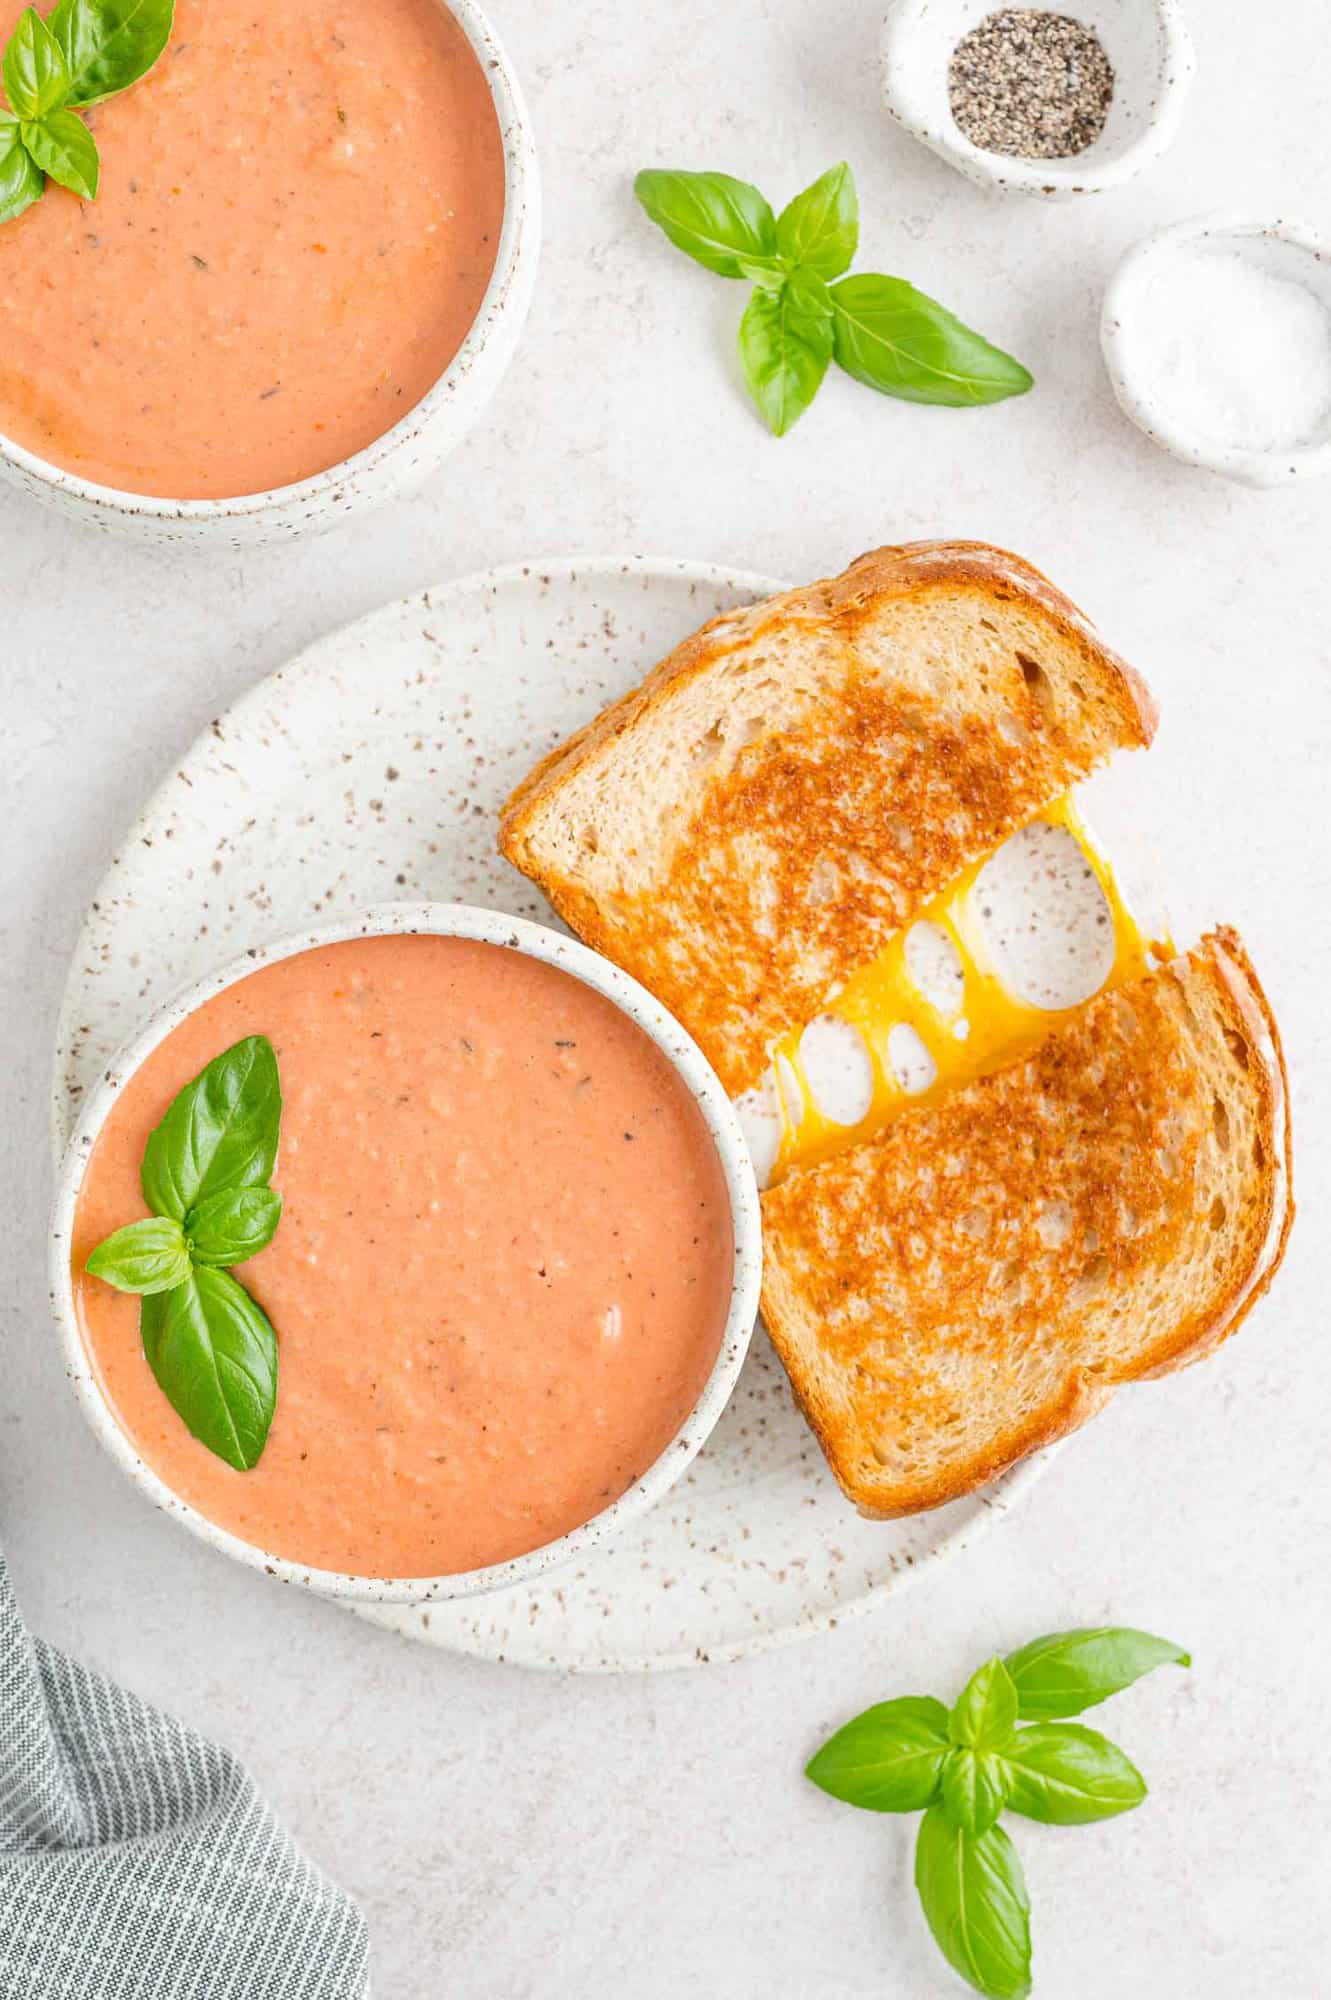 Tomato soup with grilled cheese.